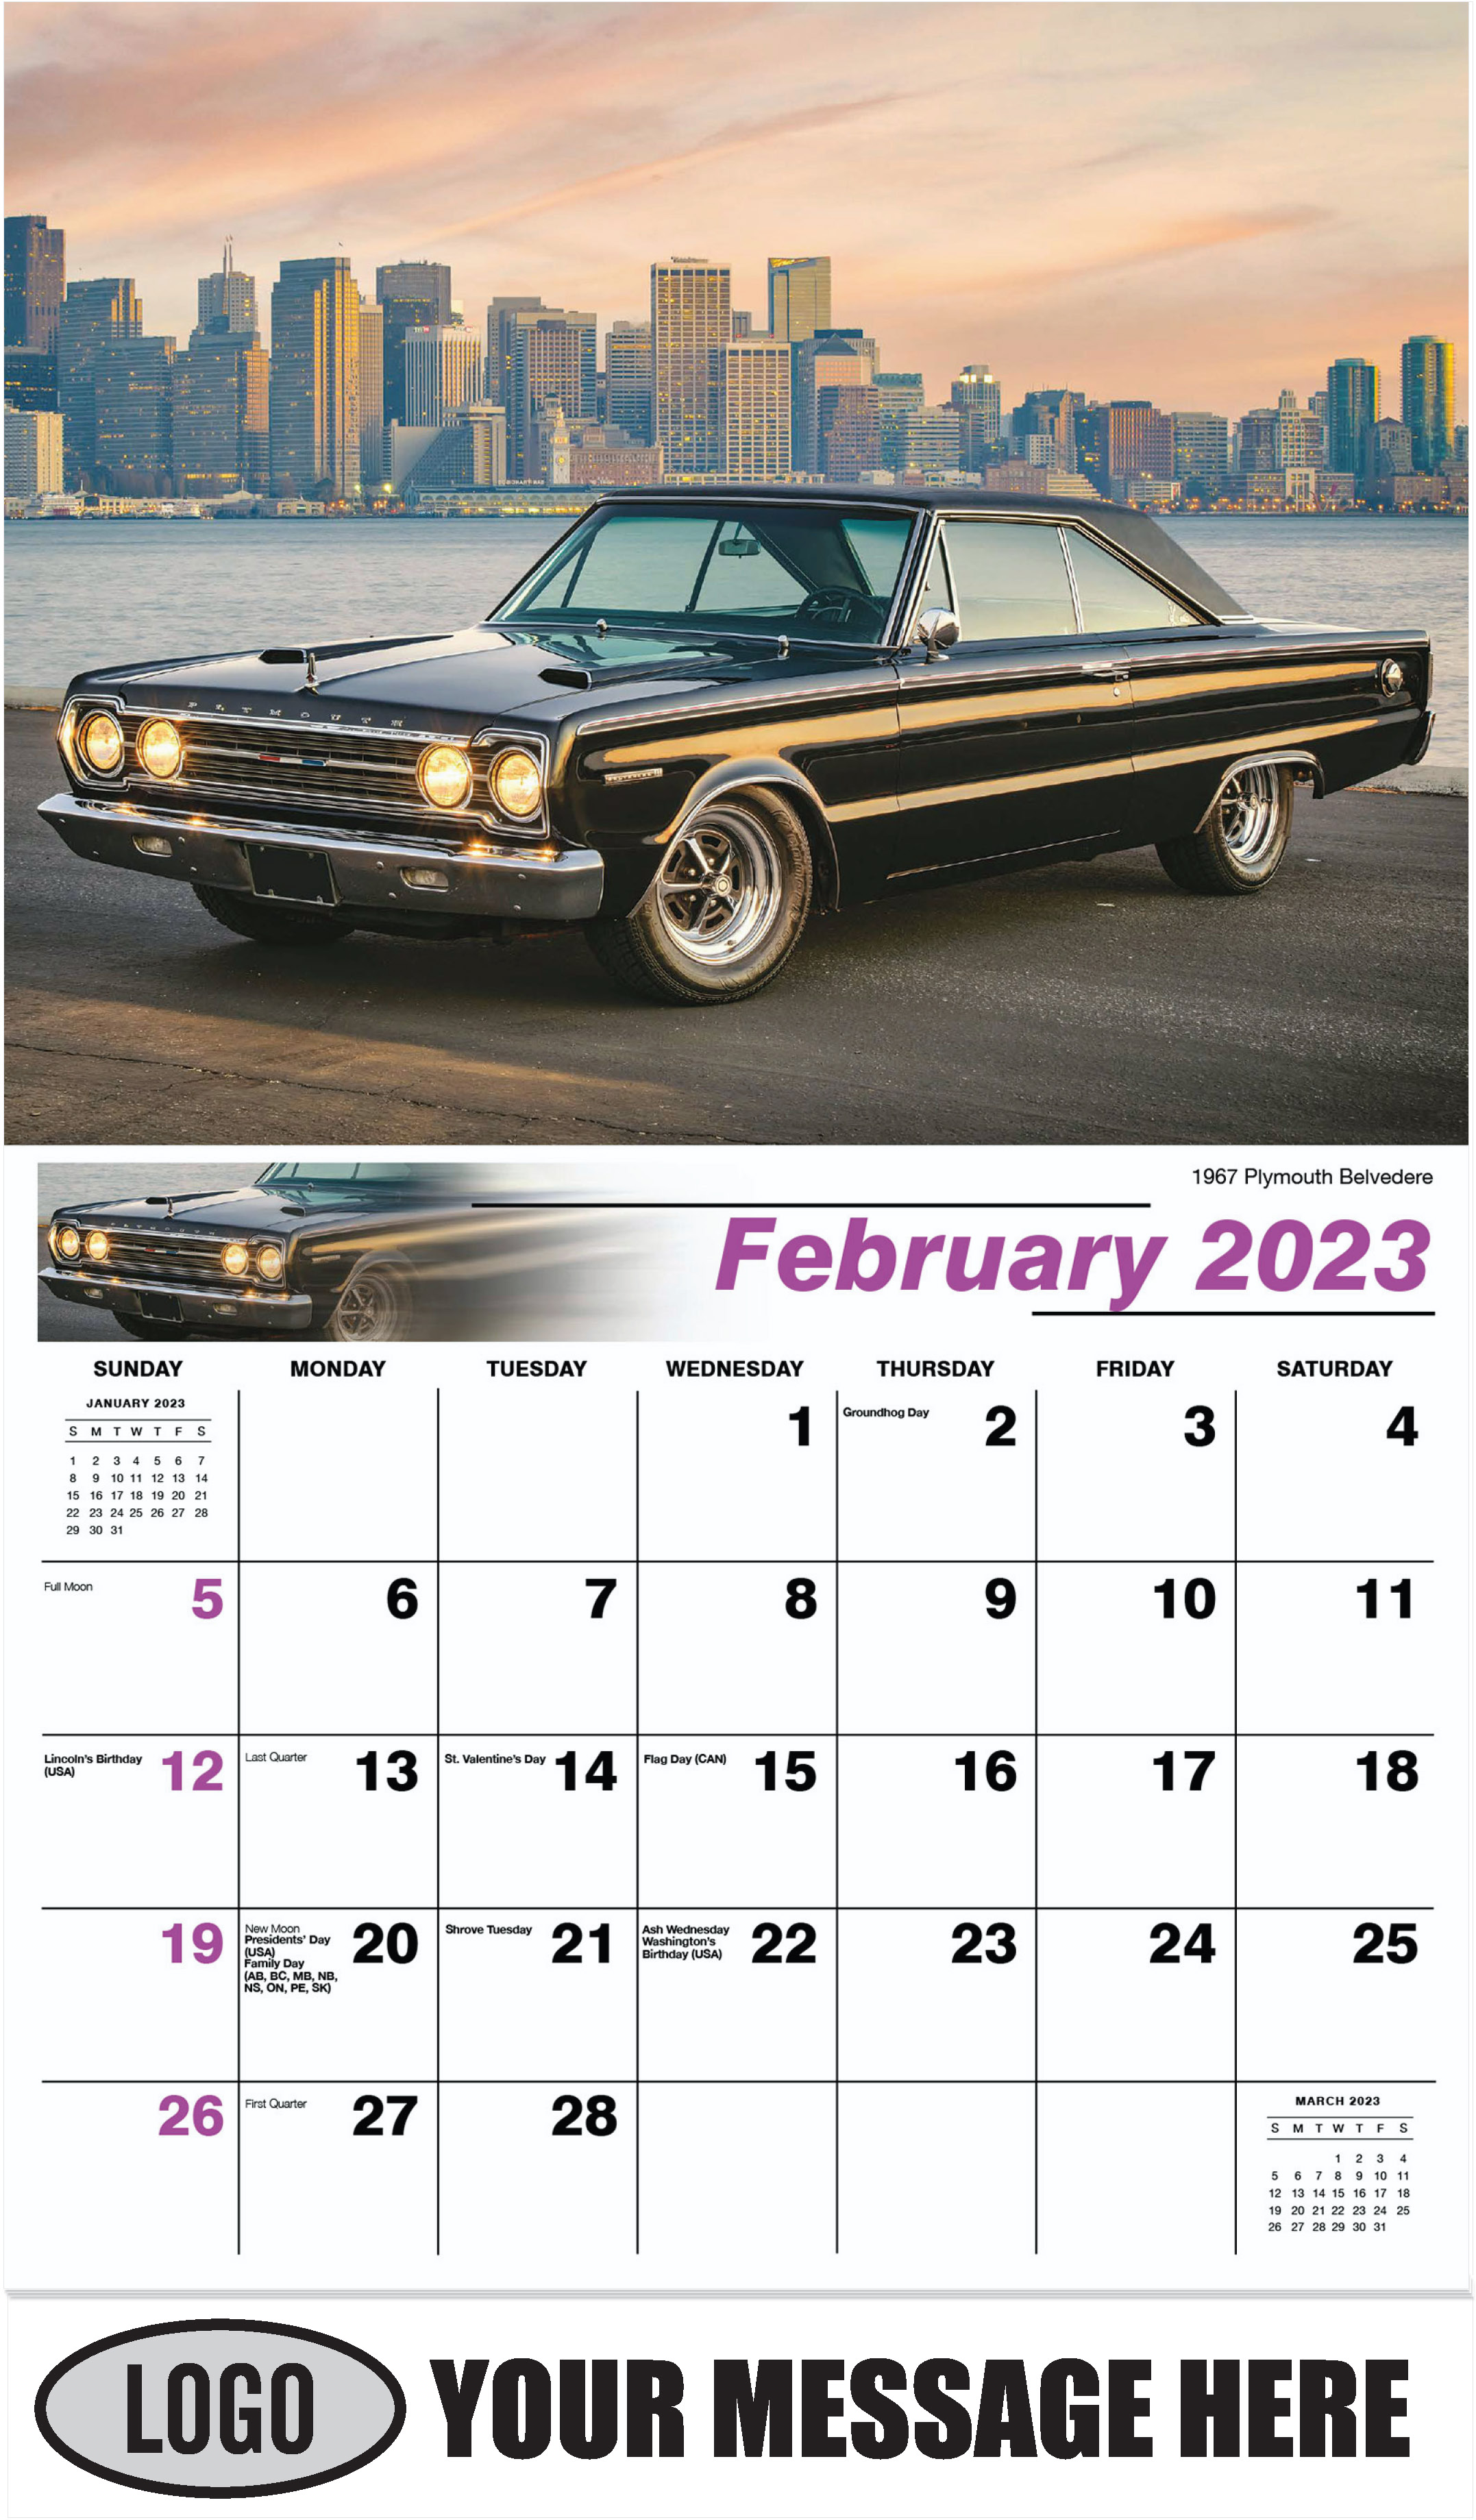 1967 Plymouth Belvedere - February - Classic Cars 2023 Promotional Calendar